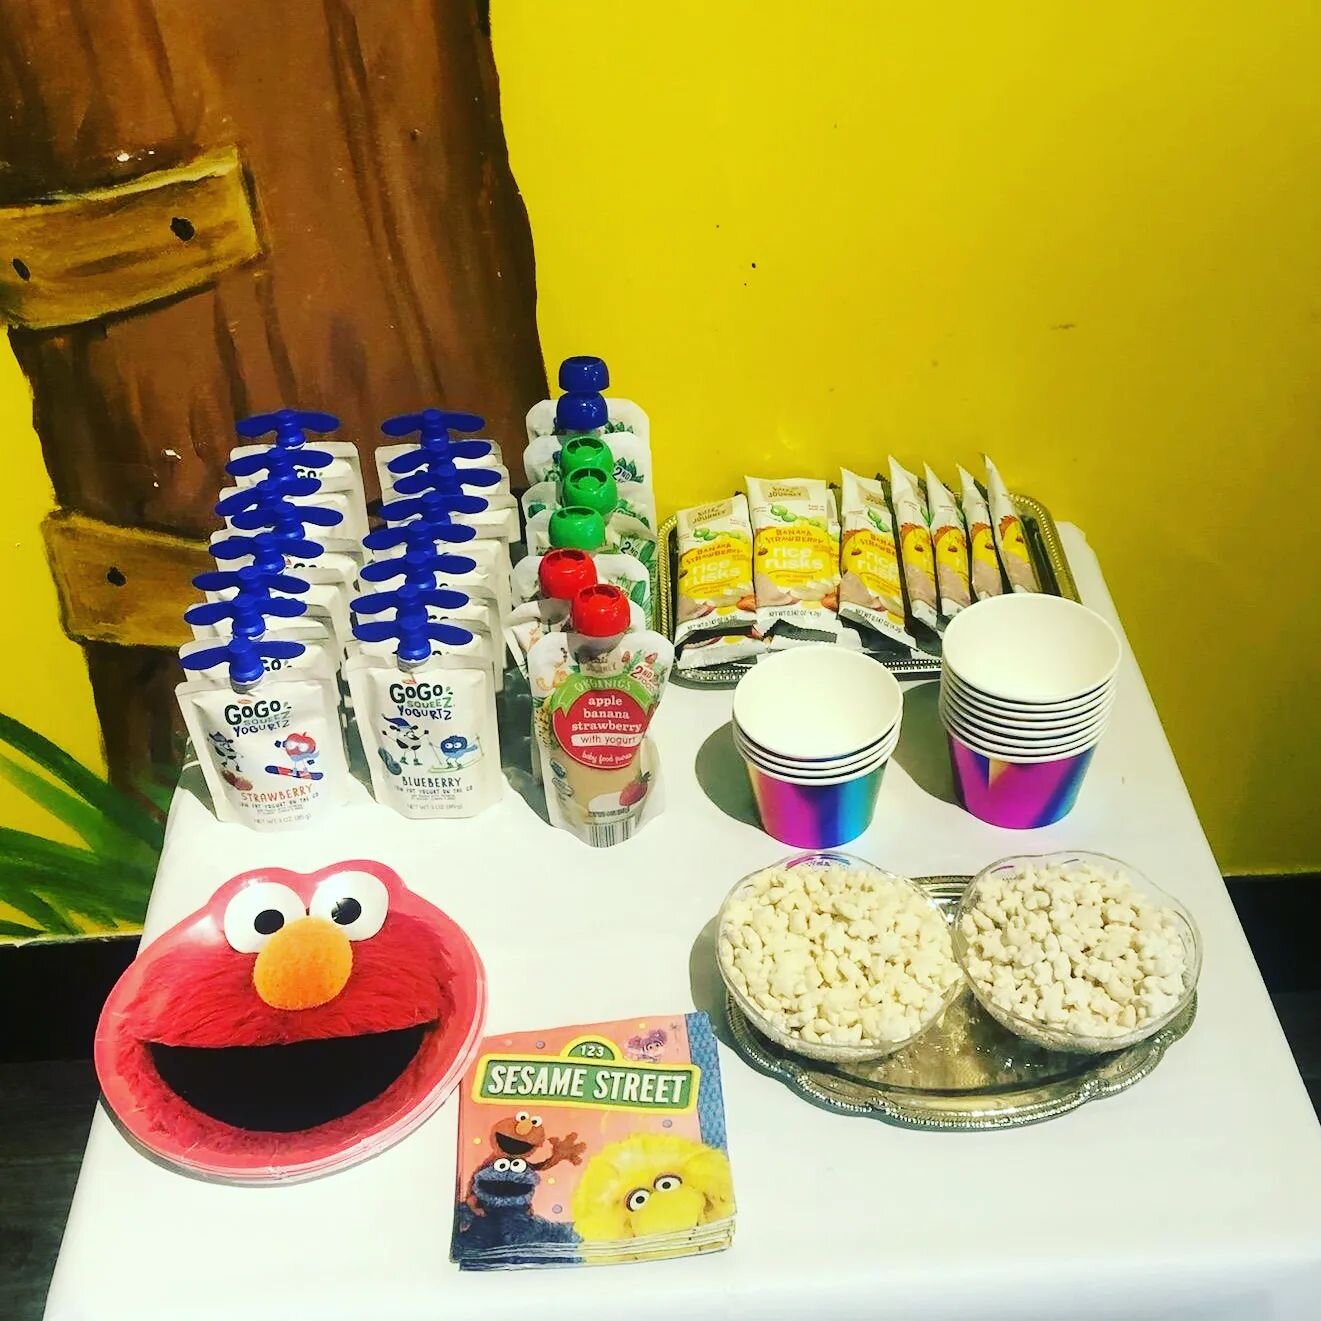 The #toddlerbar was a hit at Zoe's #sesamestreetparty . Thanks again for celebrating with us!

#chicagopartyplanner 
#chicagoplayroom 
#chicagokidsparty 
#chicagokidsparties 
#bucktownchicago 
#logansquarechicago